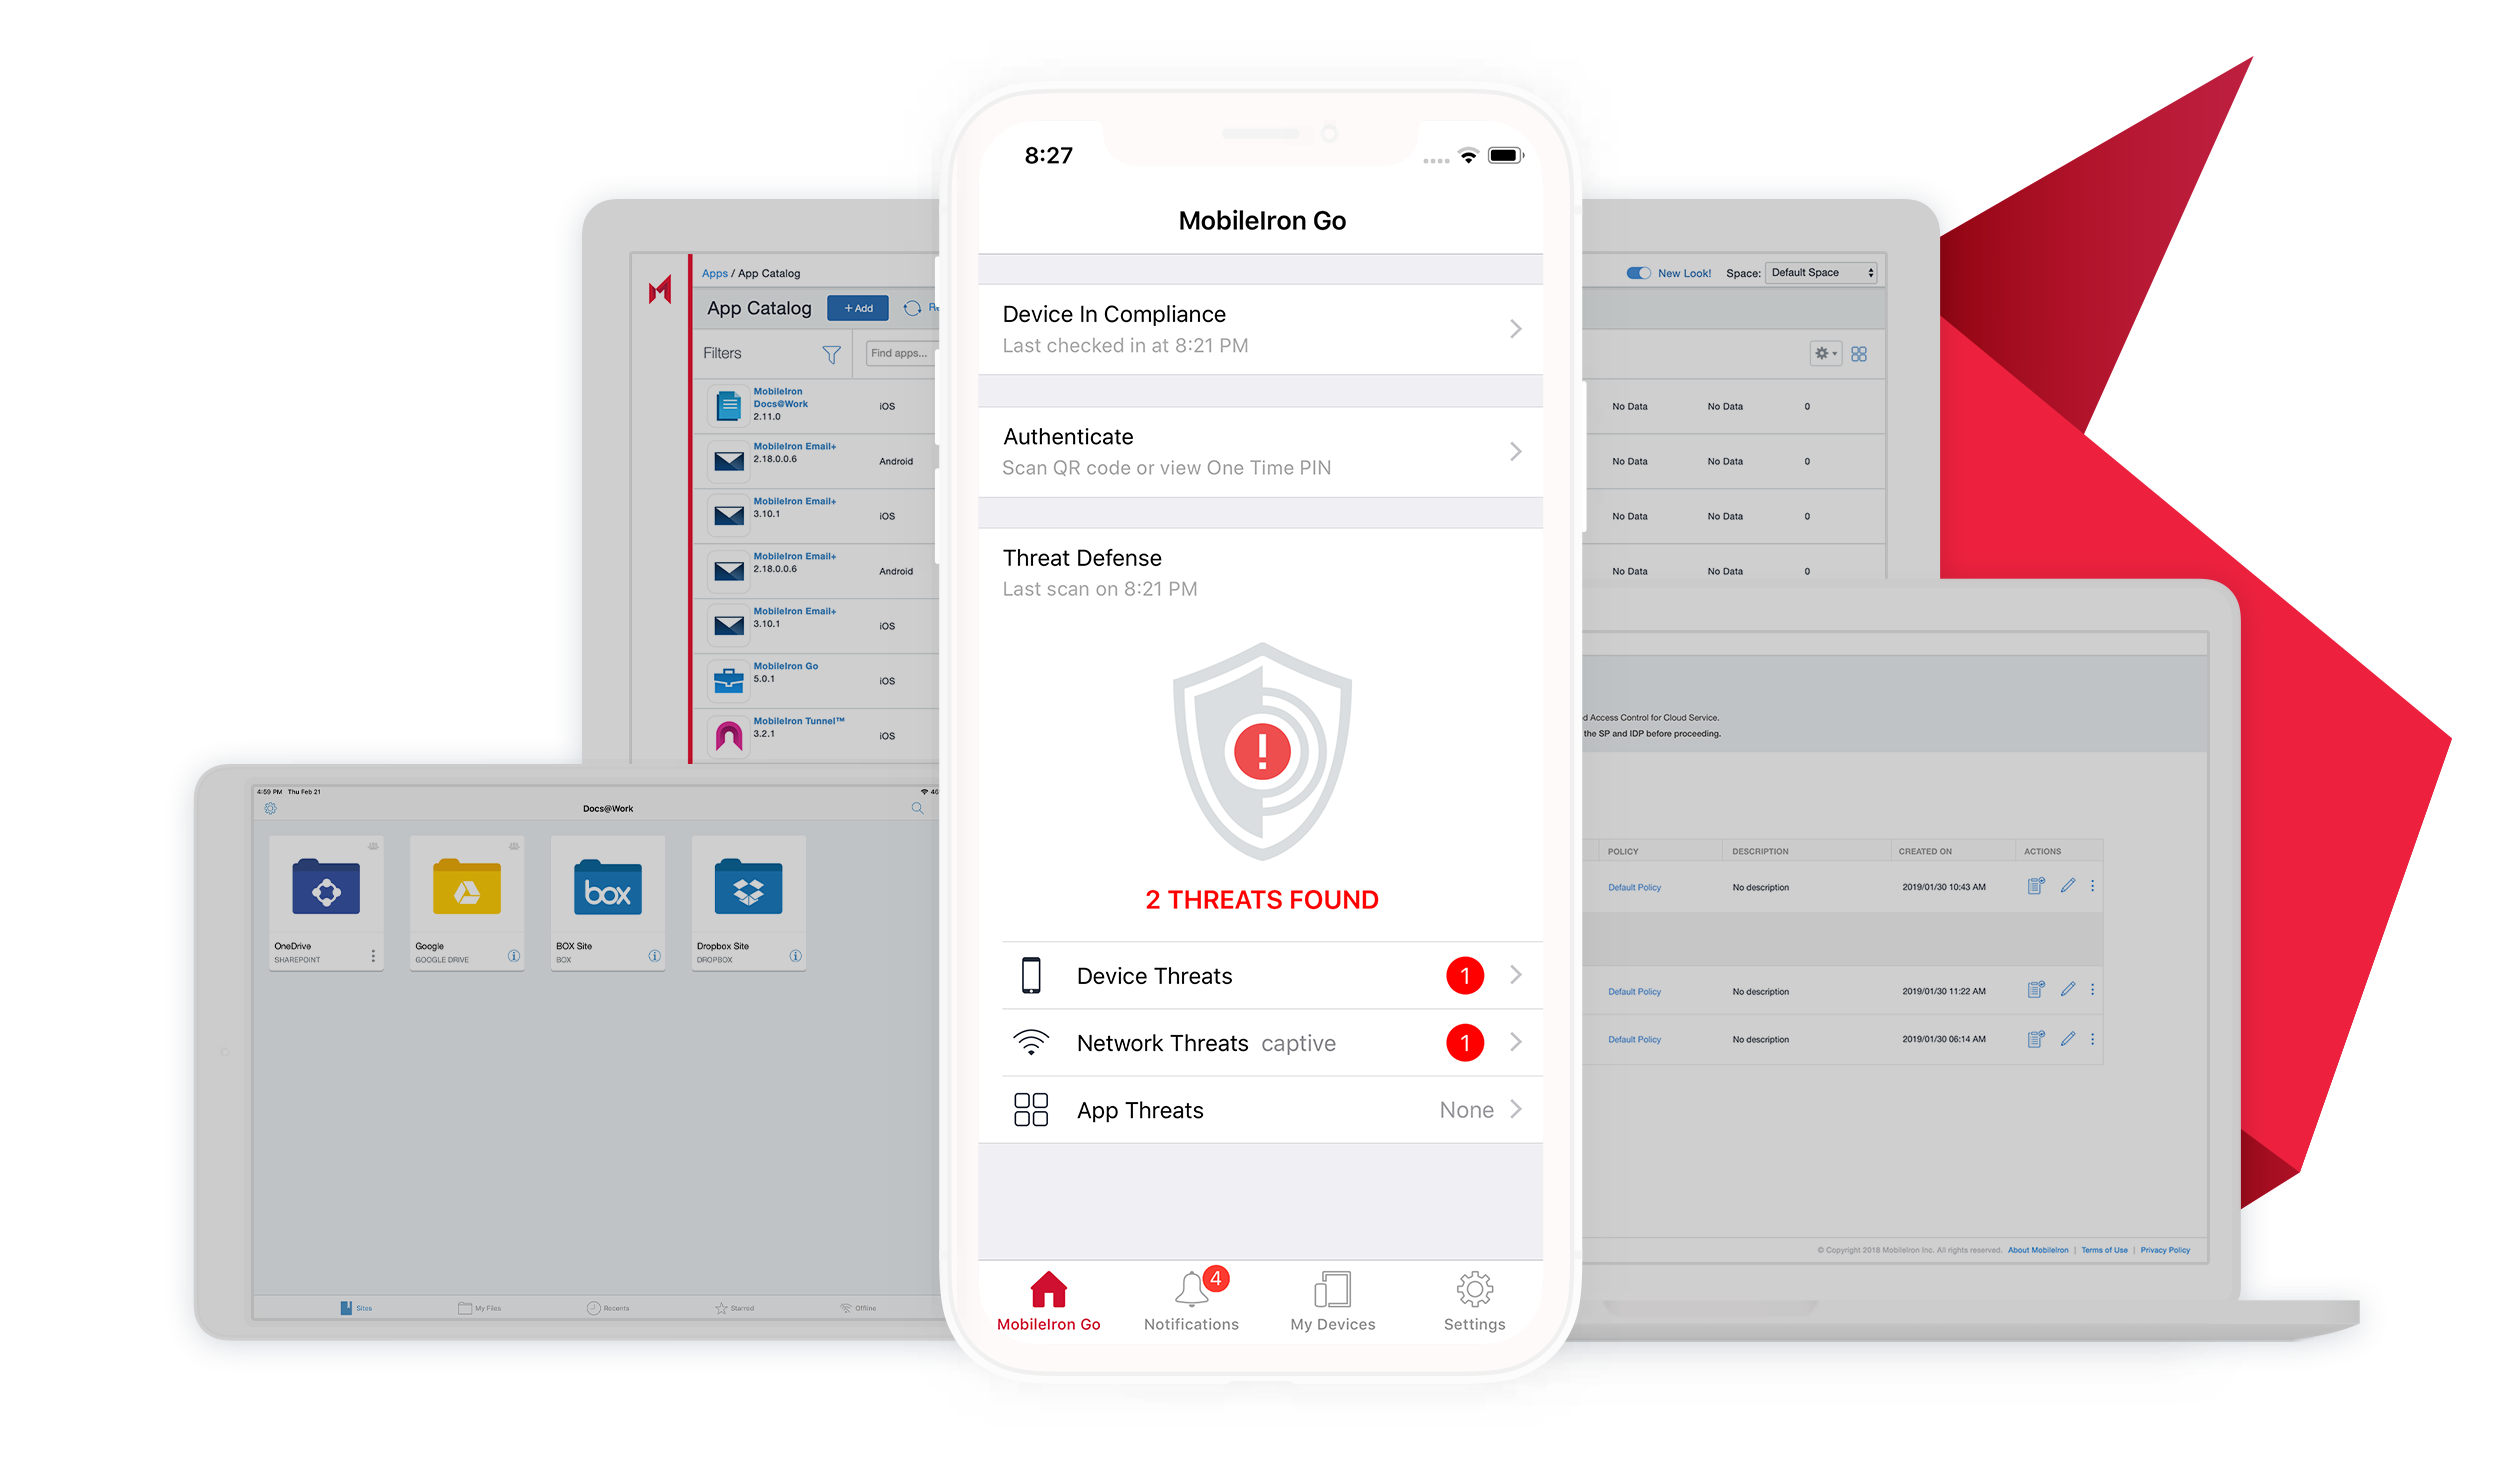 Intuitive interface and dashboard. MobileIron contains a variety of insightful data points related to the security posture of every device within the organization